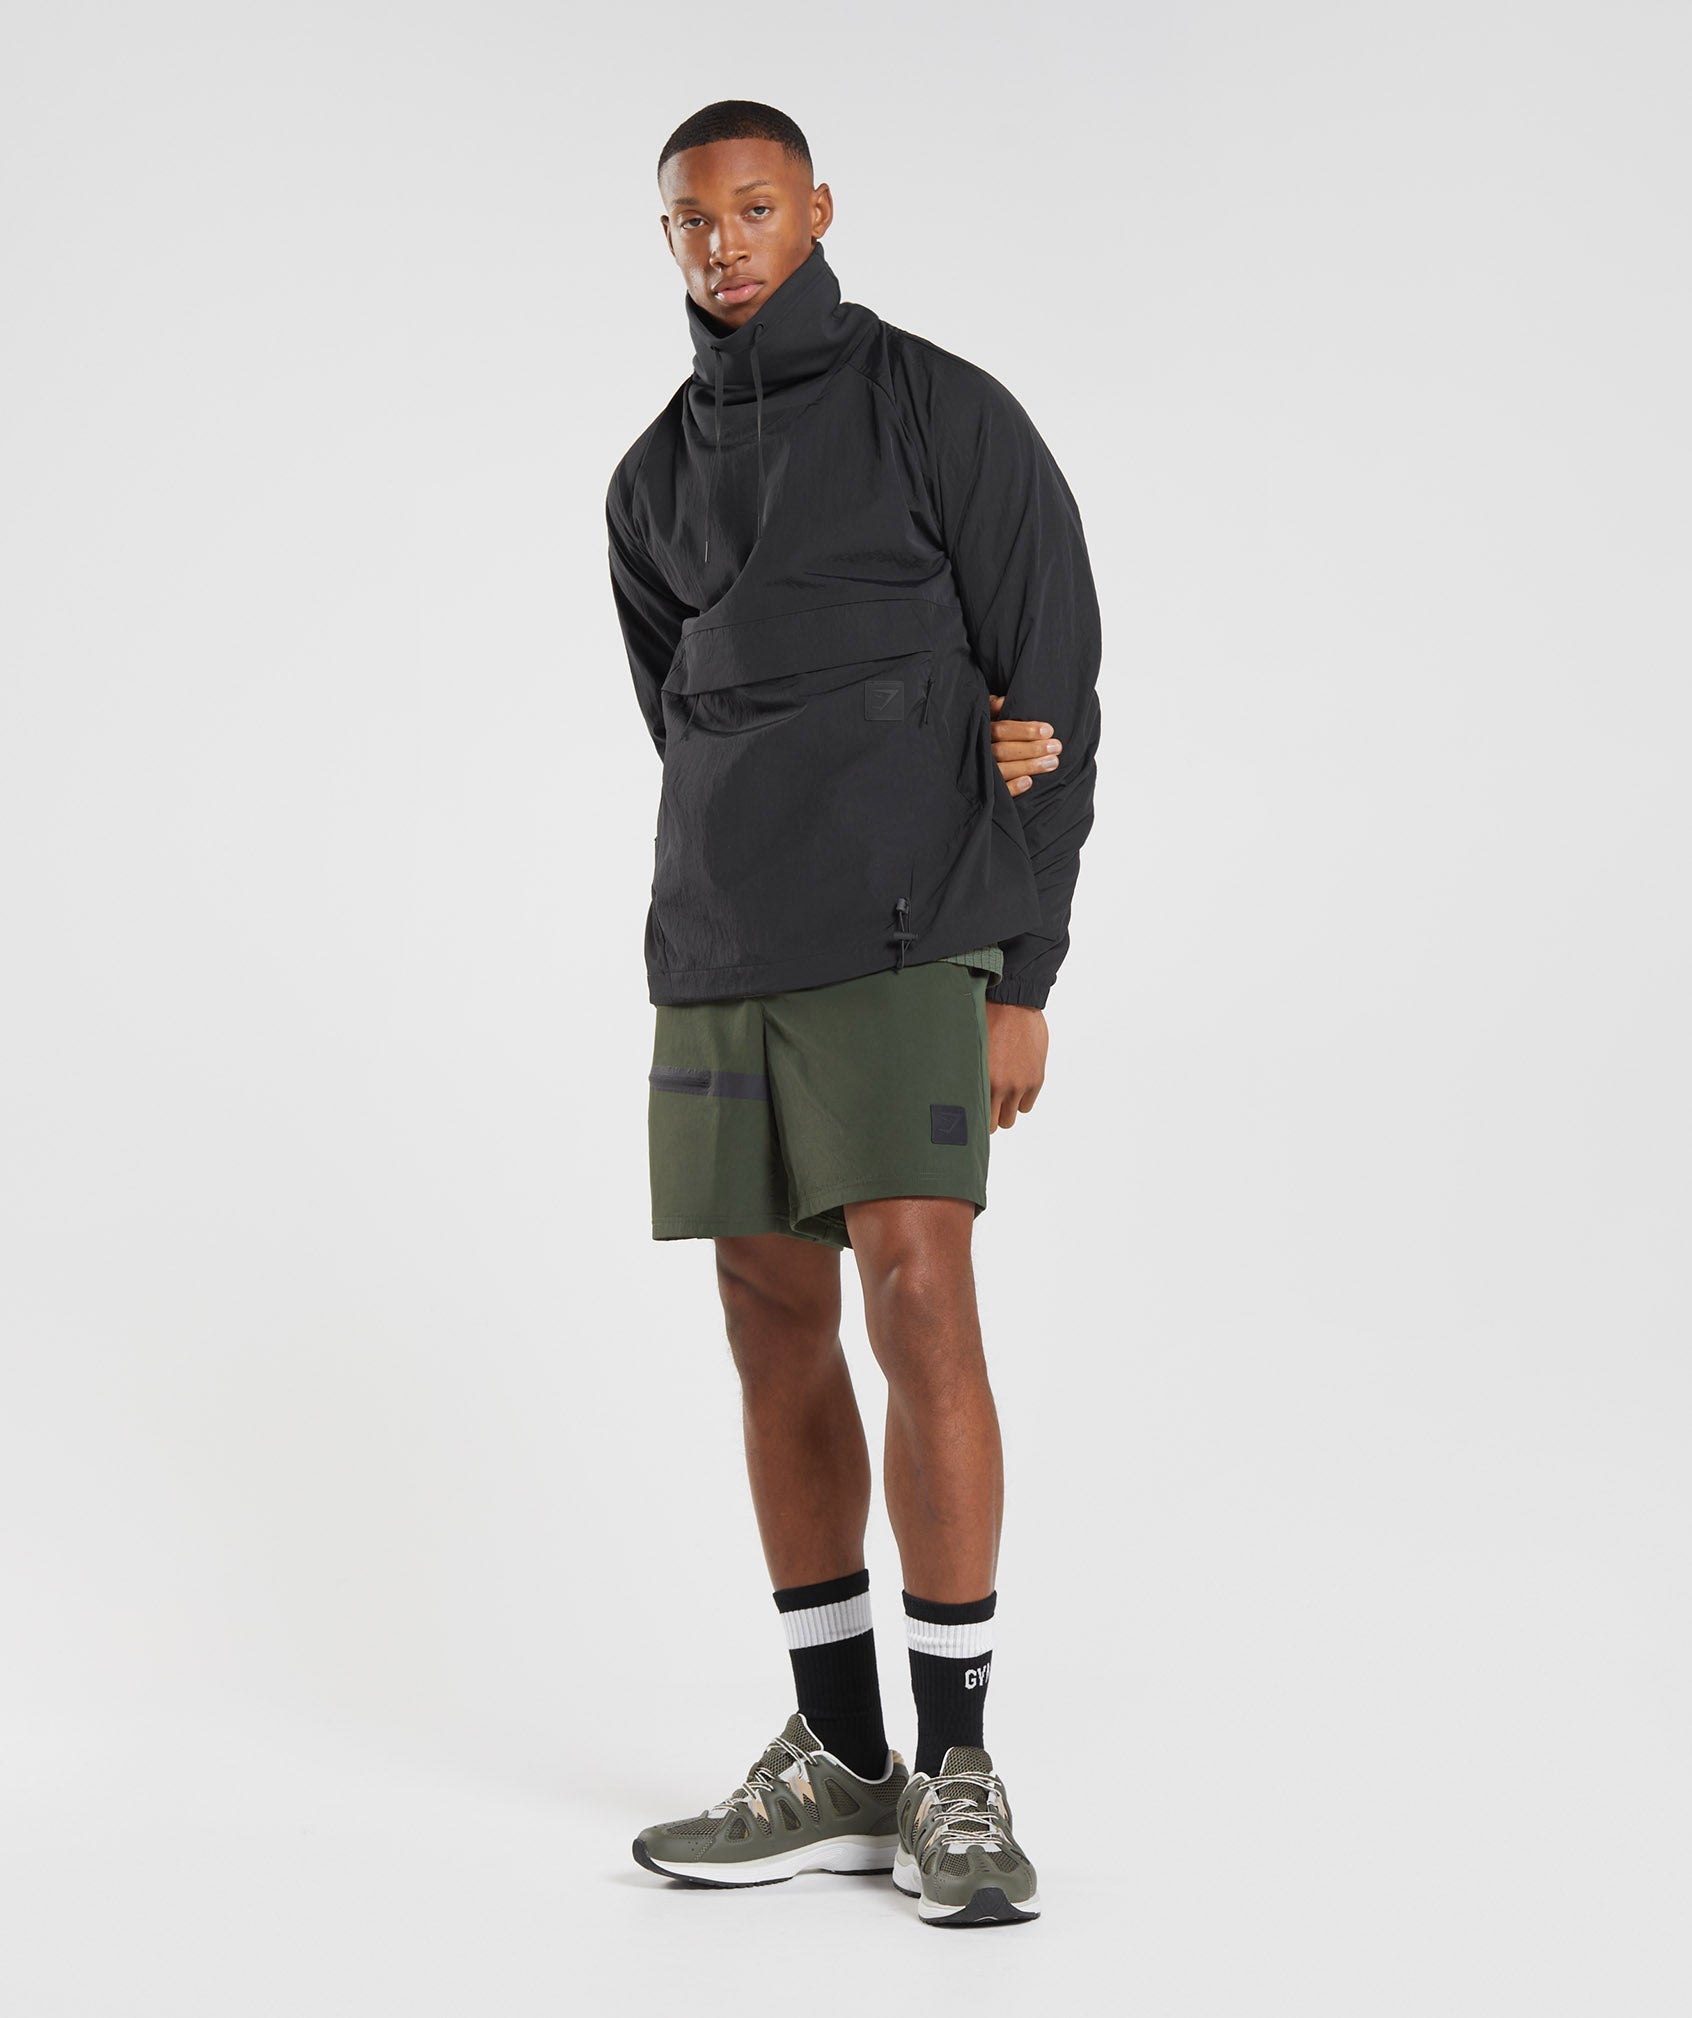 Retake Woven 7" Shorts in Moss Olive - view 4